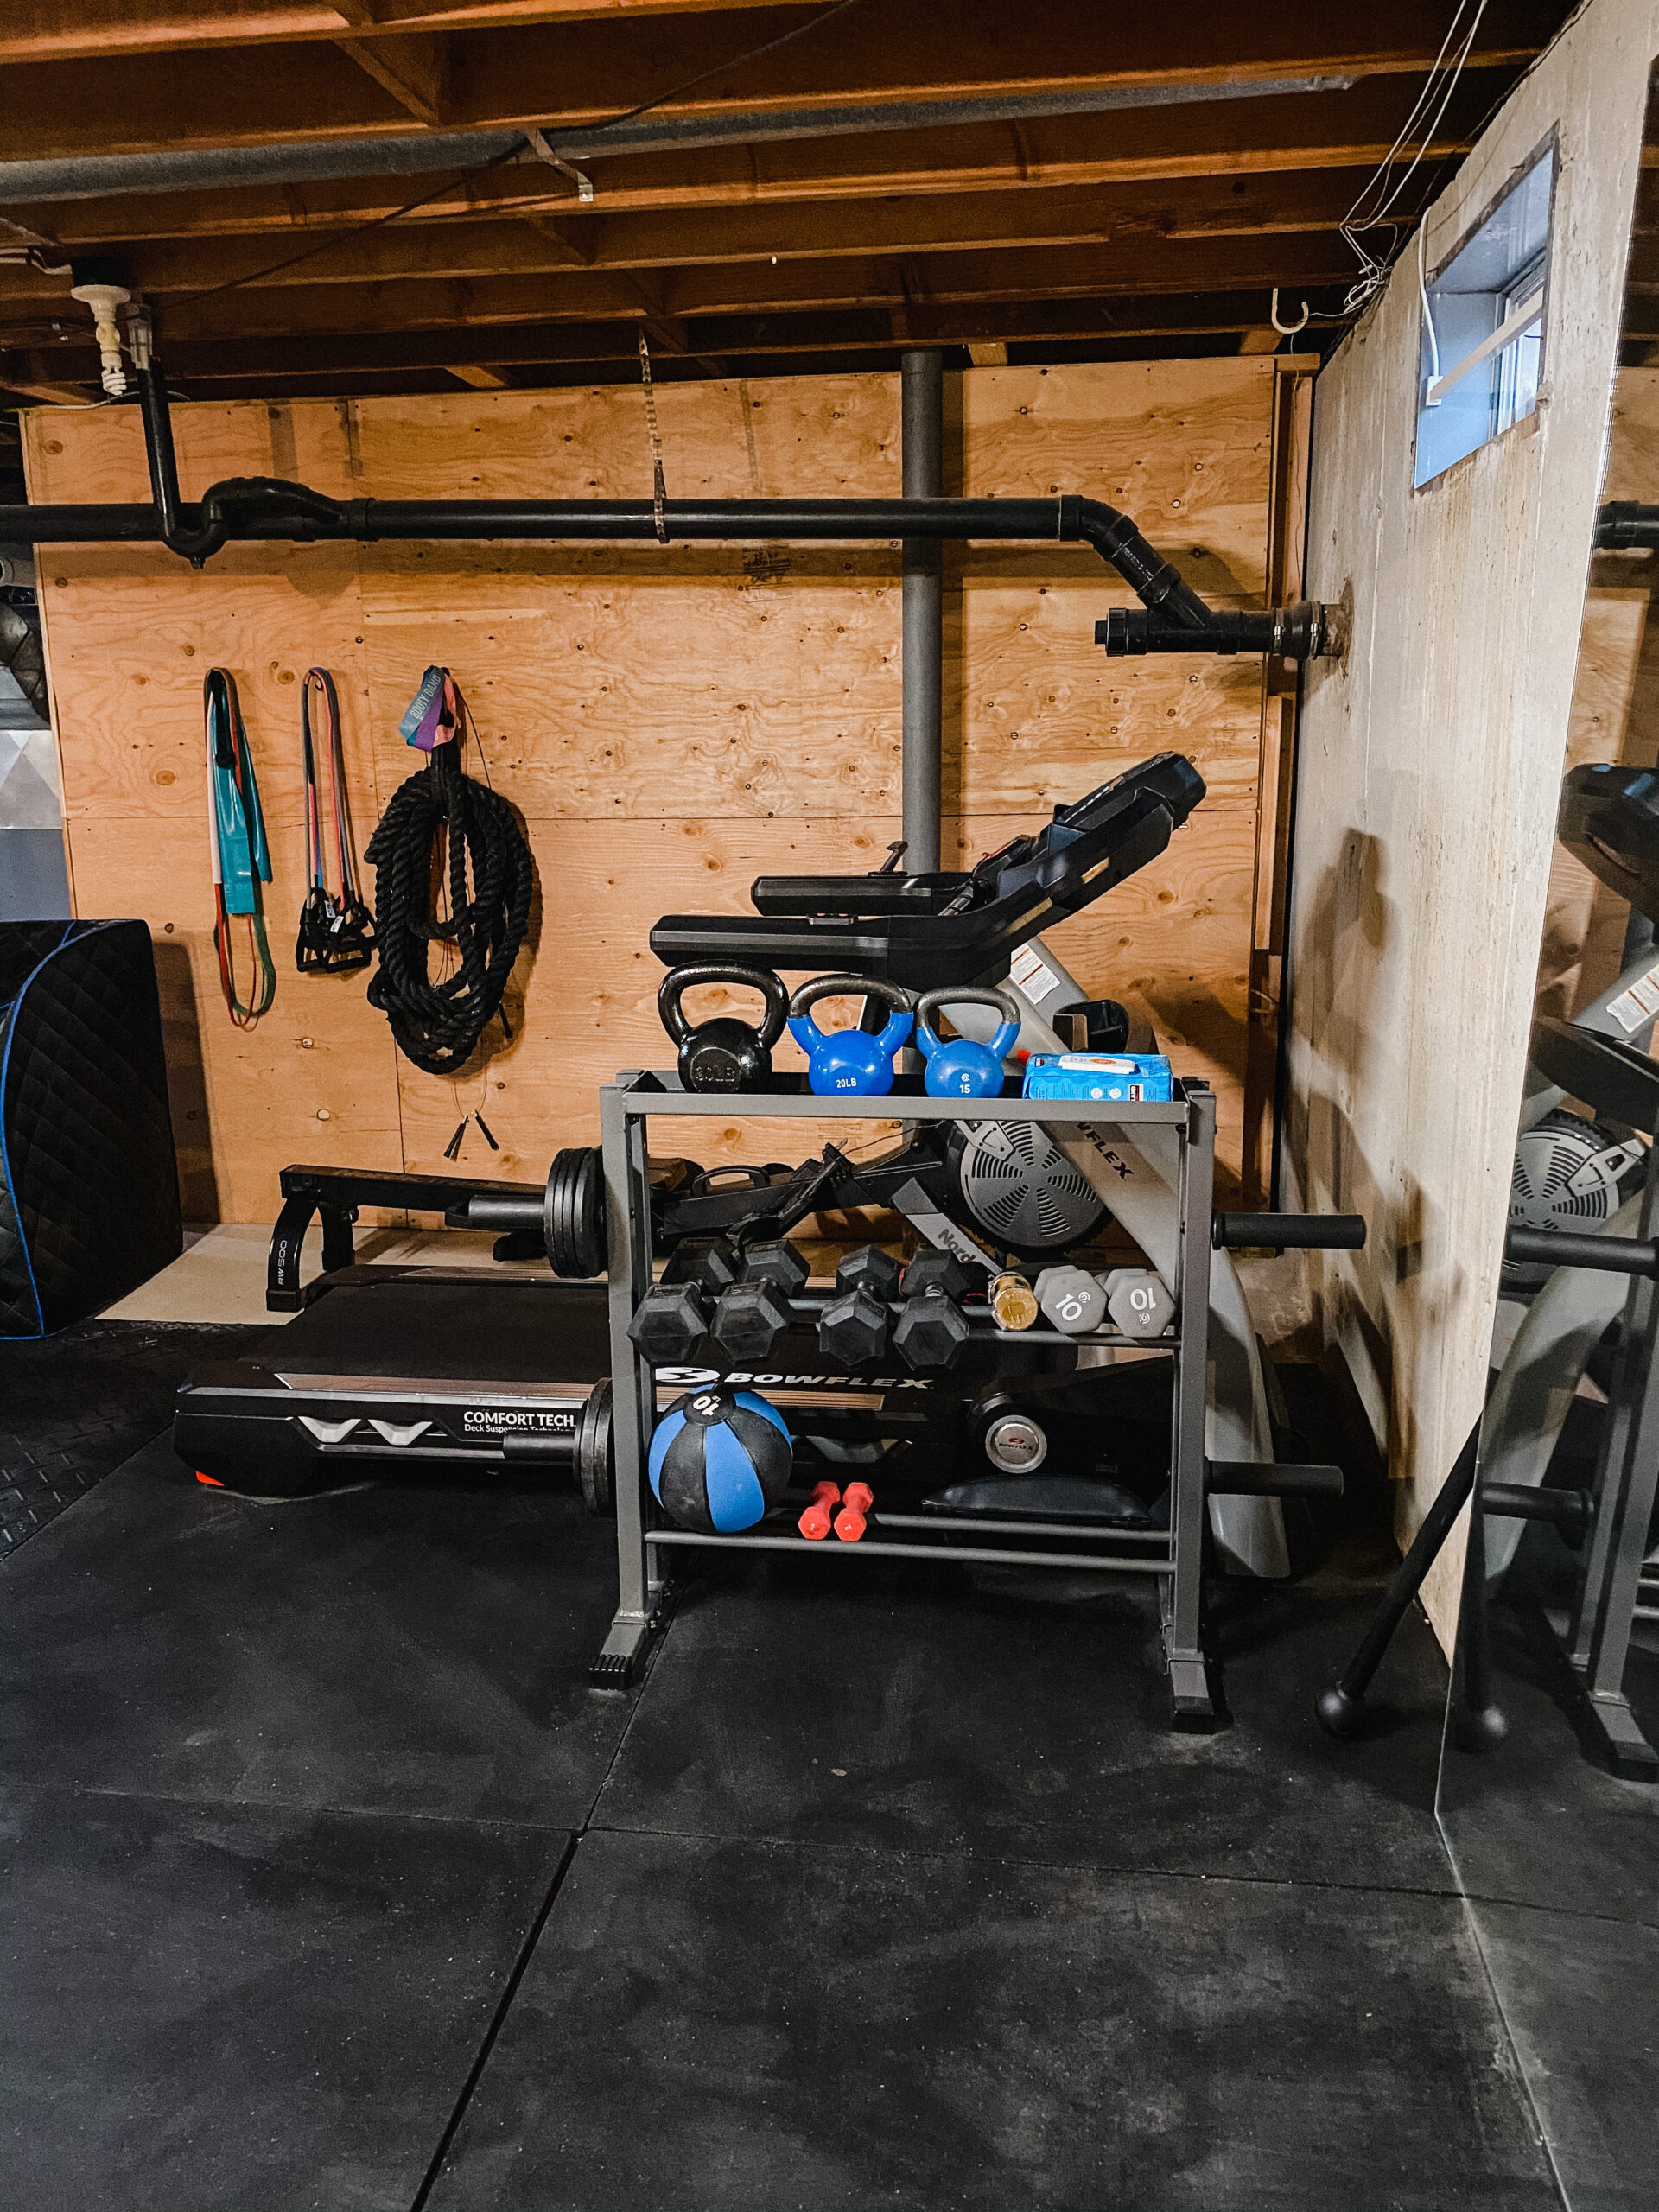 In-Home Gym Designs and Workouts - Fitness Inside & Out – Naples Expert  Personal Training, Post-Rehab Conditioning, & Concierge Gym